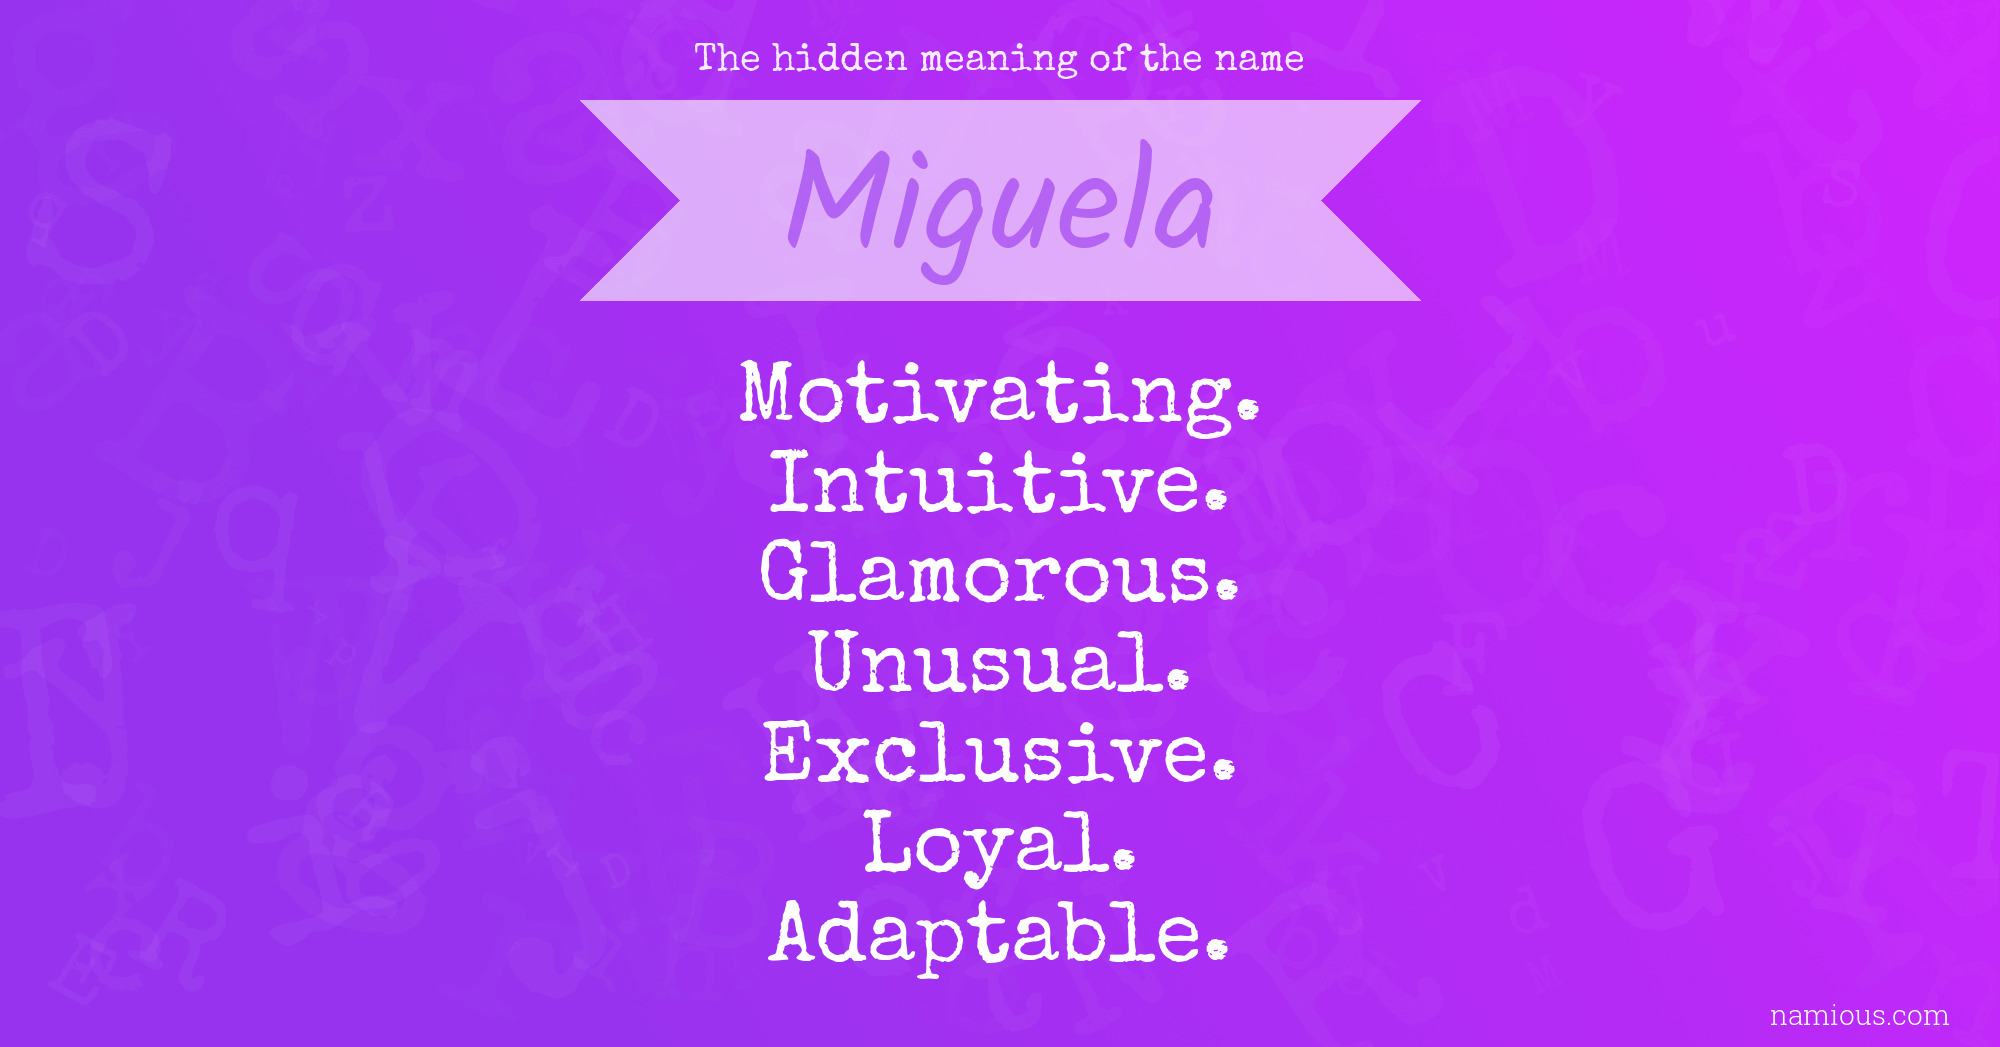 The hidden meaning of the name Miguela